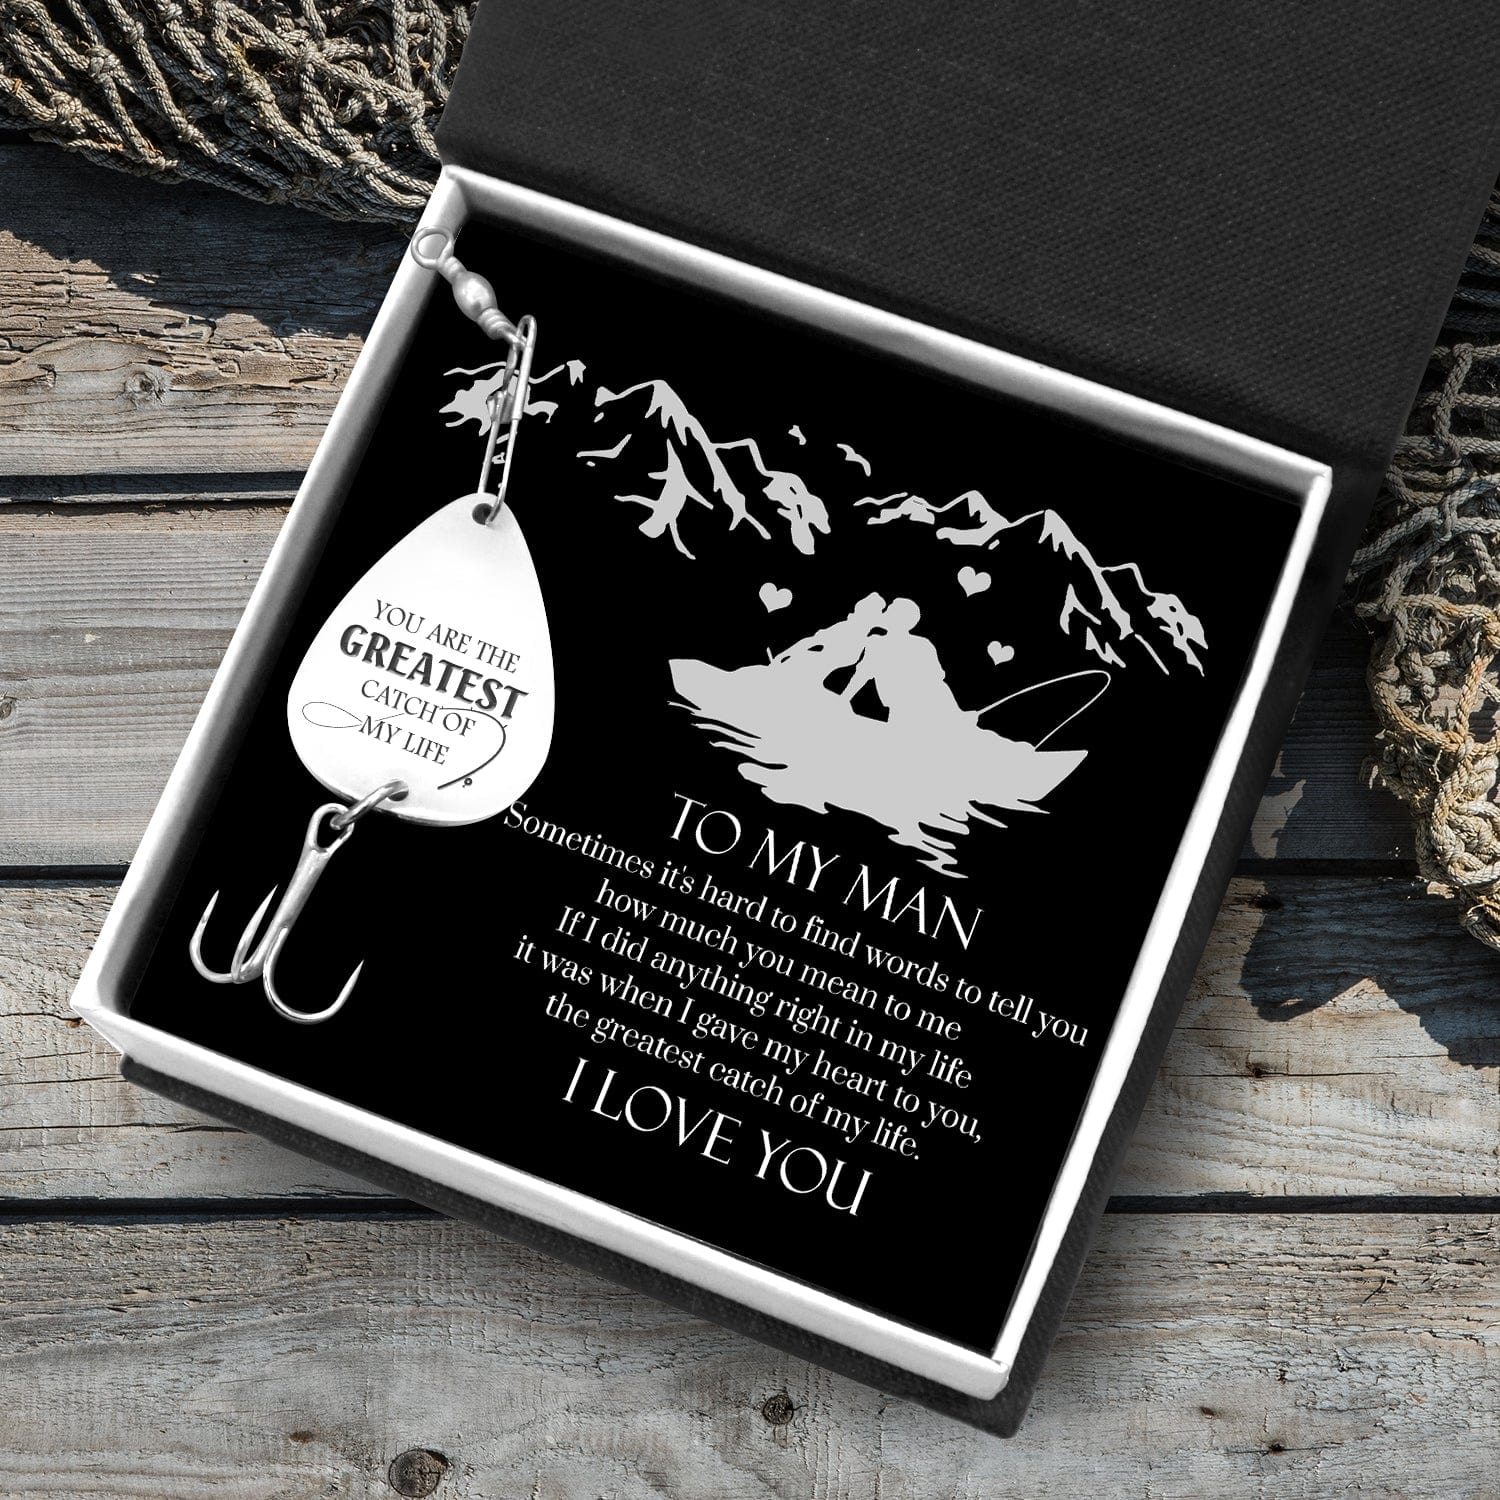 You are The Greatest Catch of My Life Fishing Lure Hook Husband Hubby  Boyfriend Gifts Fisherman Gift Fishing Lover Gift for Birthday Gift for Men